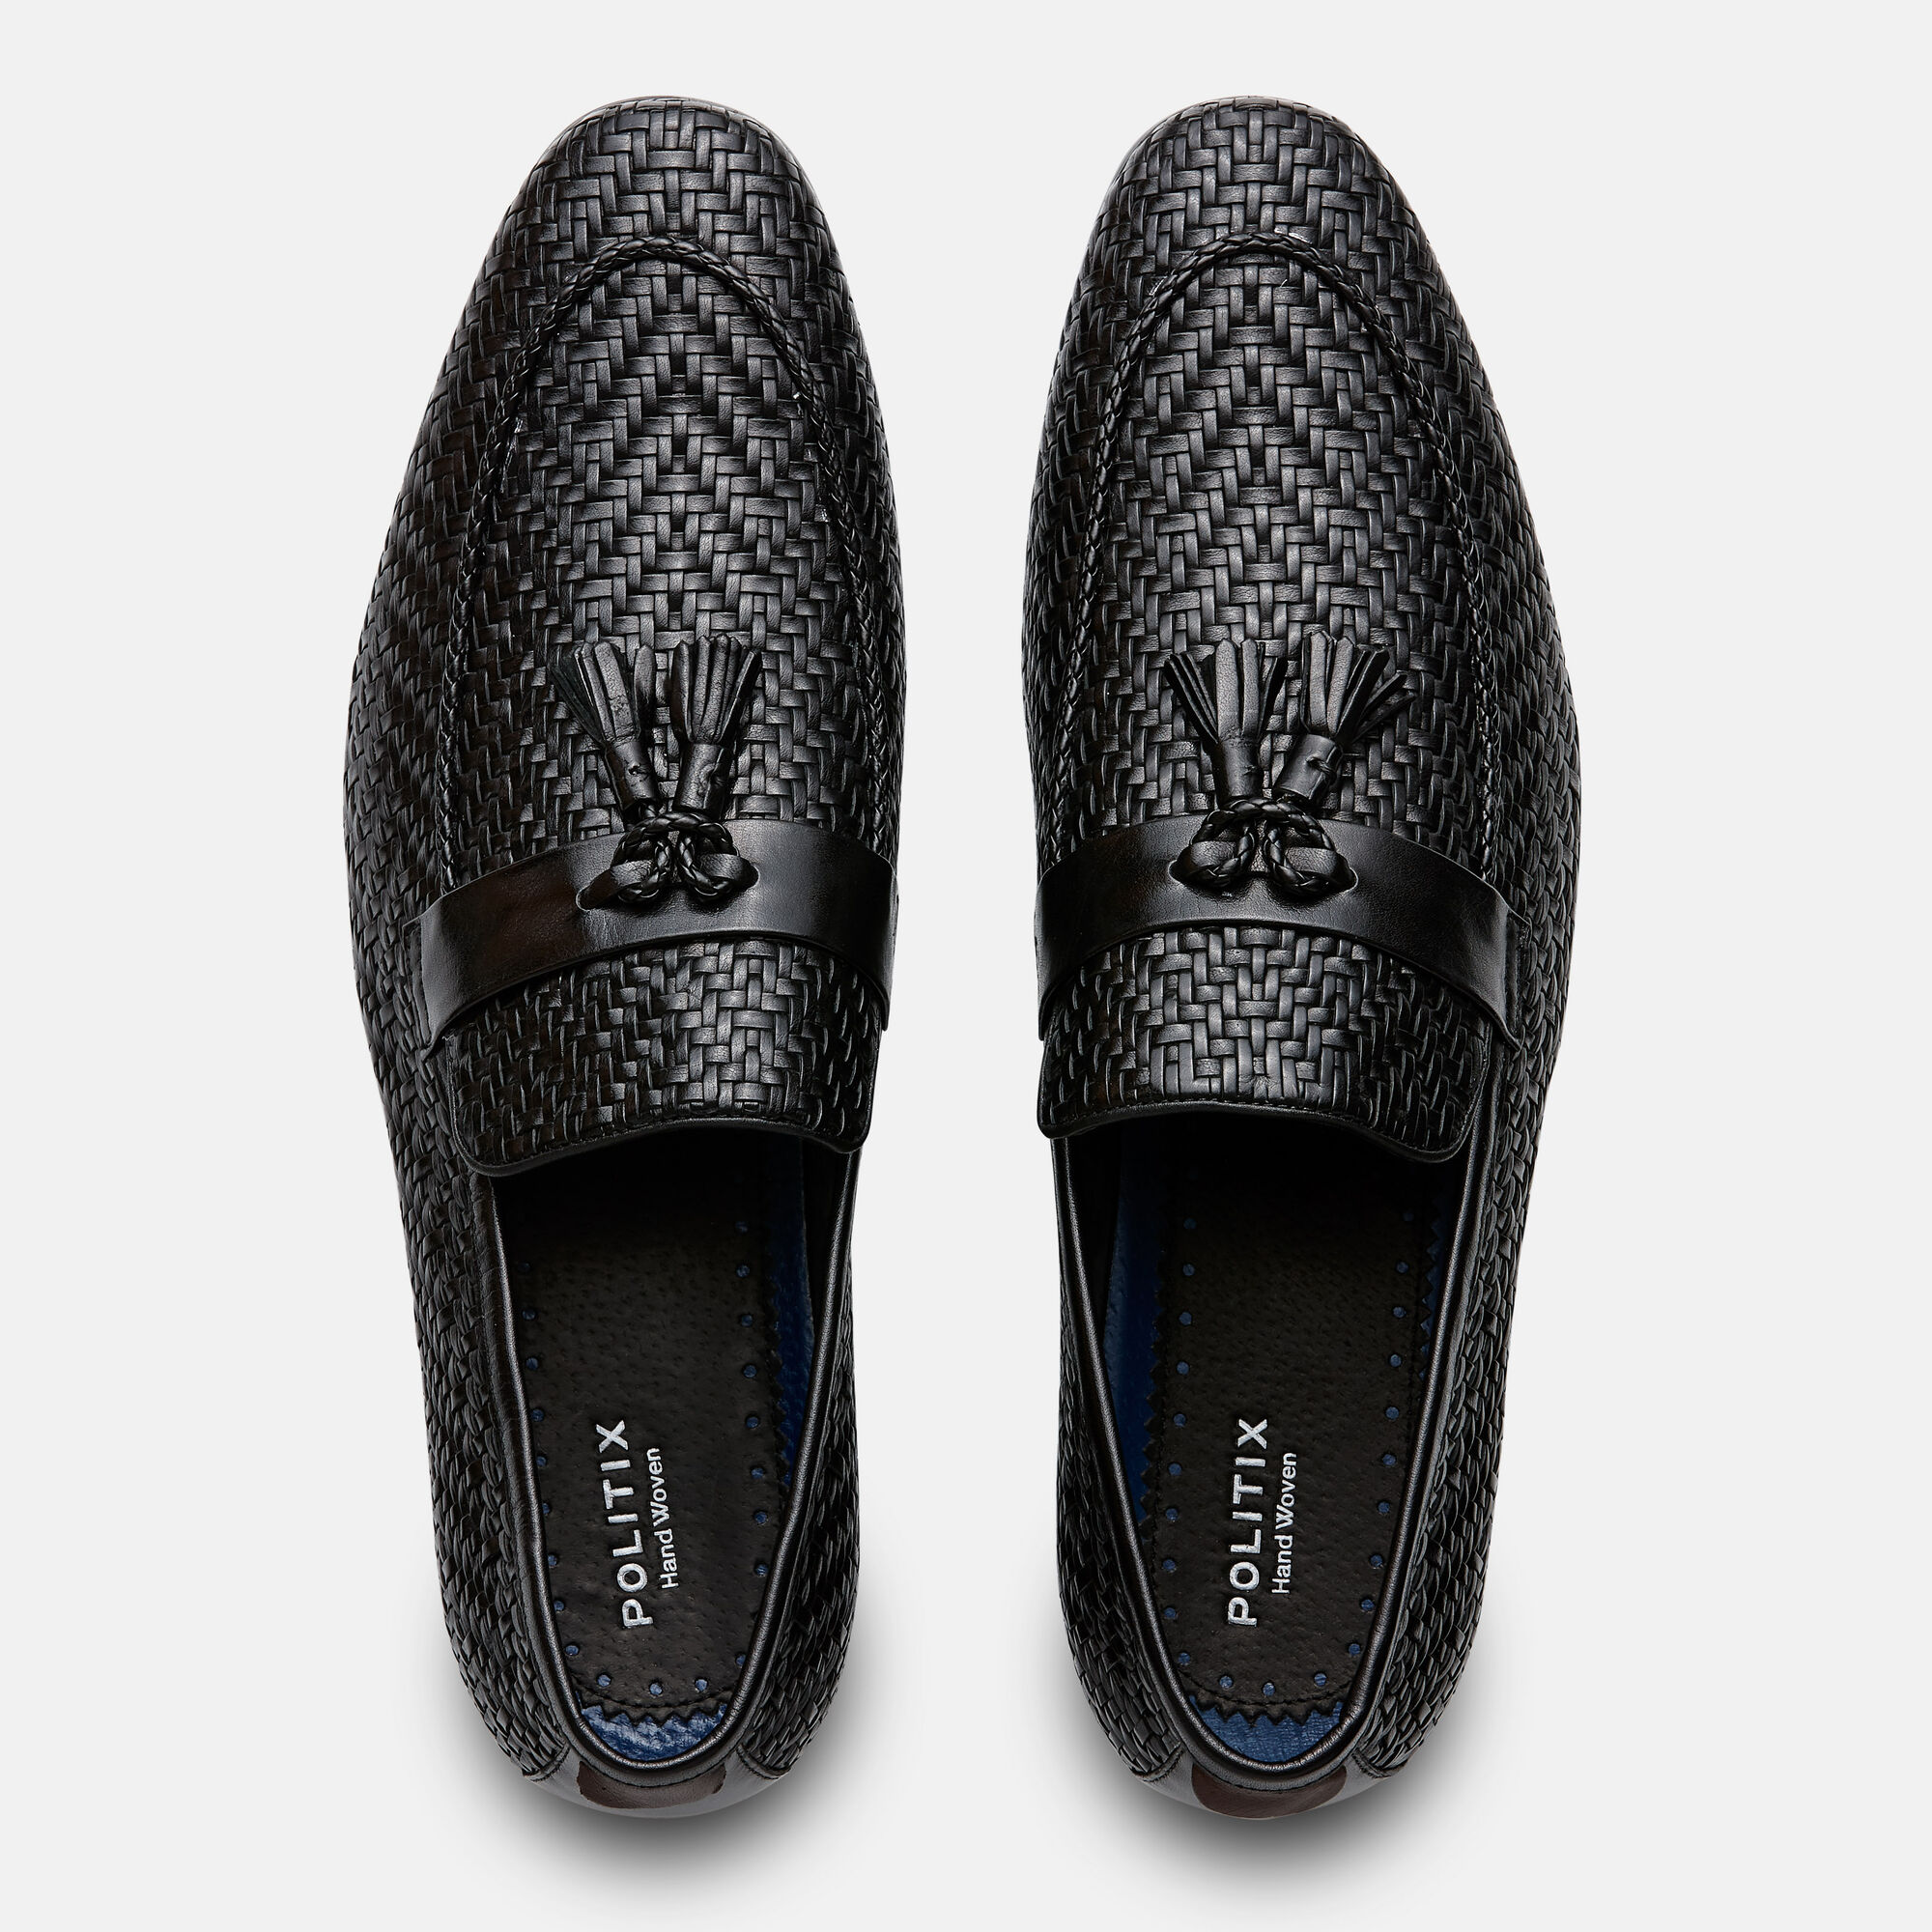 Zakkary - Black - Loafer Shoes Hand Woven Leather | shoes | Politix